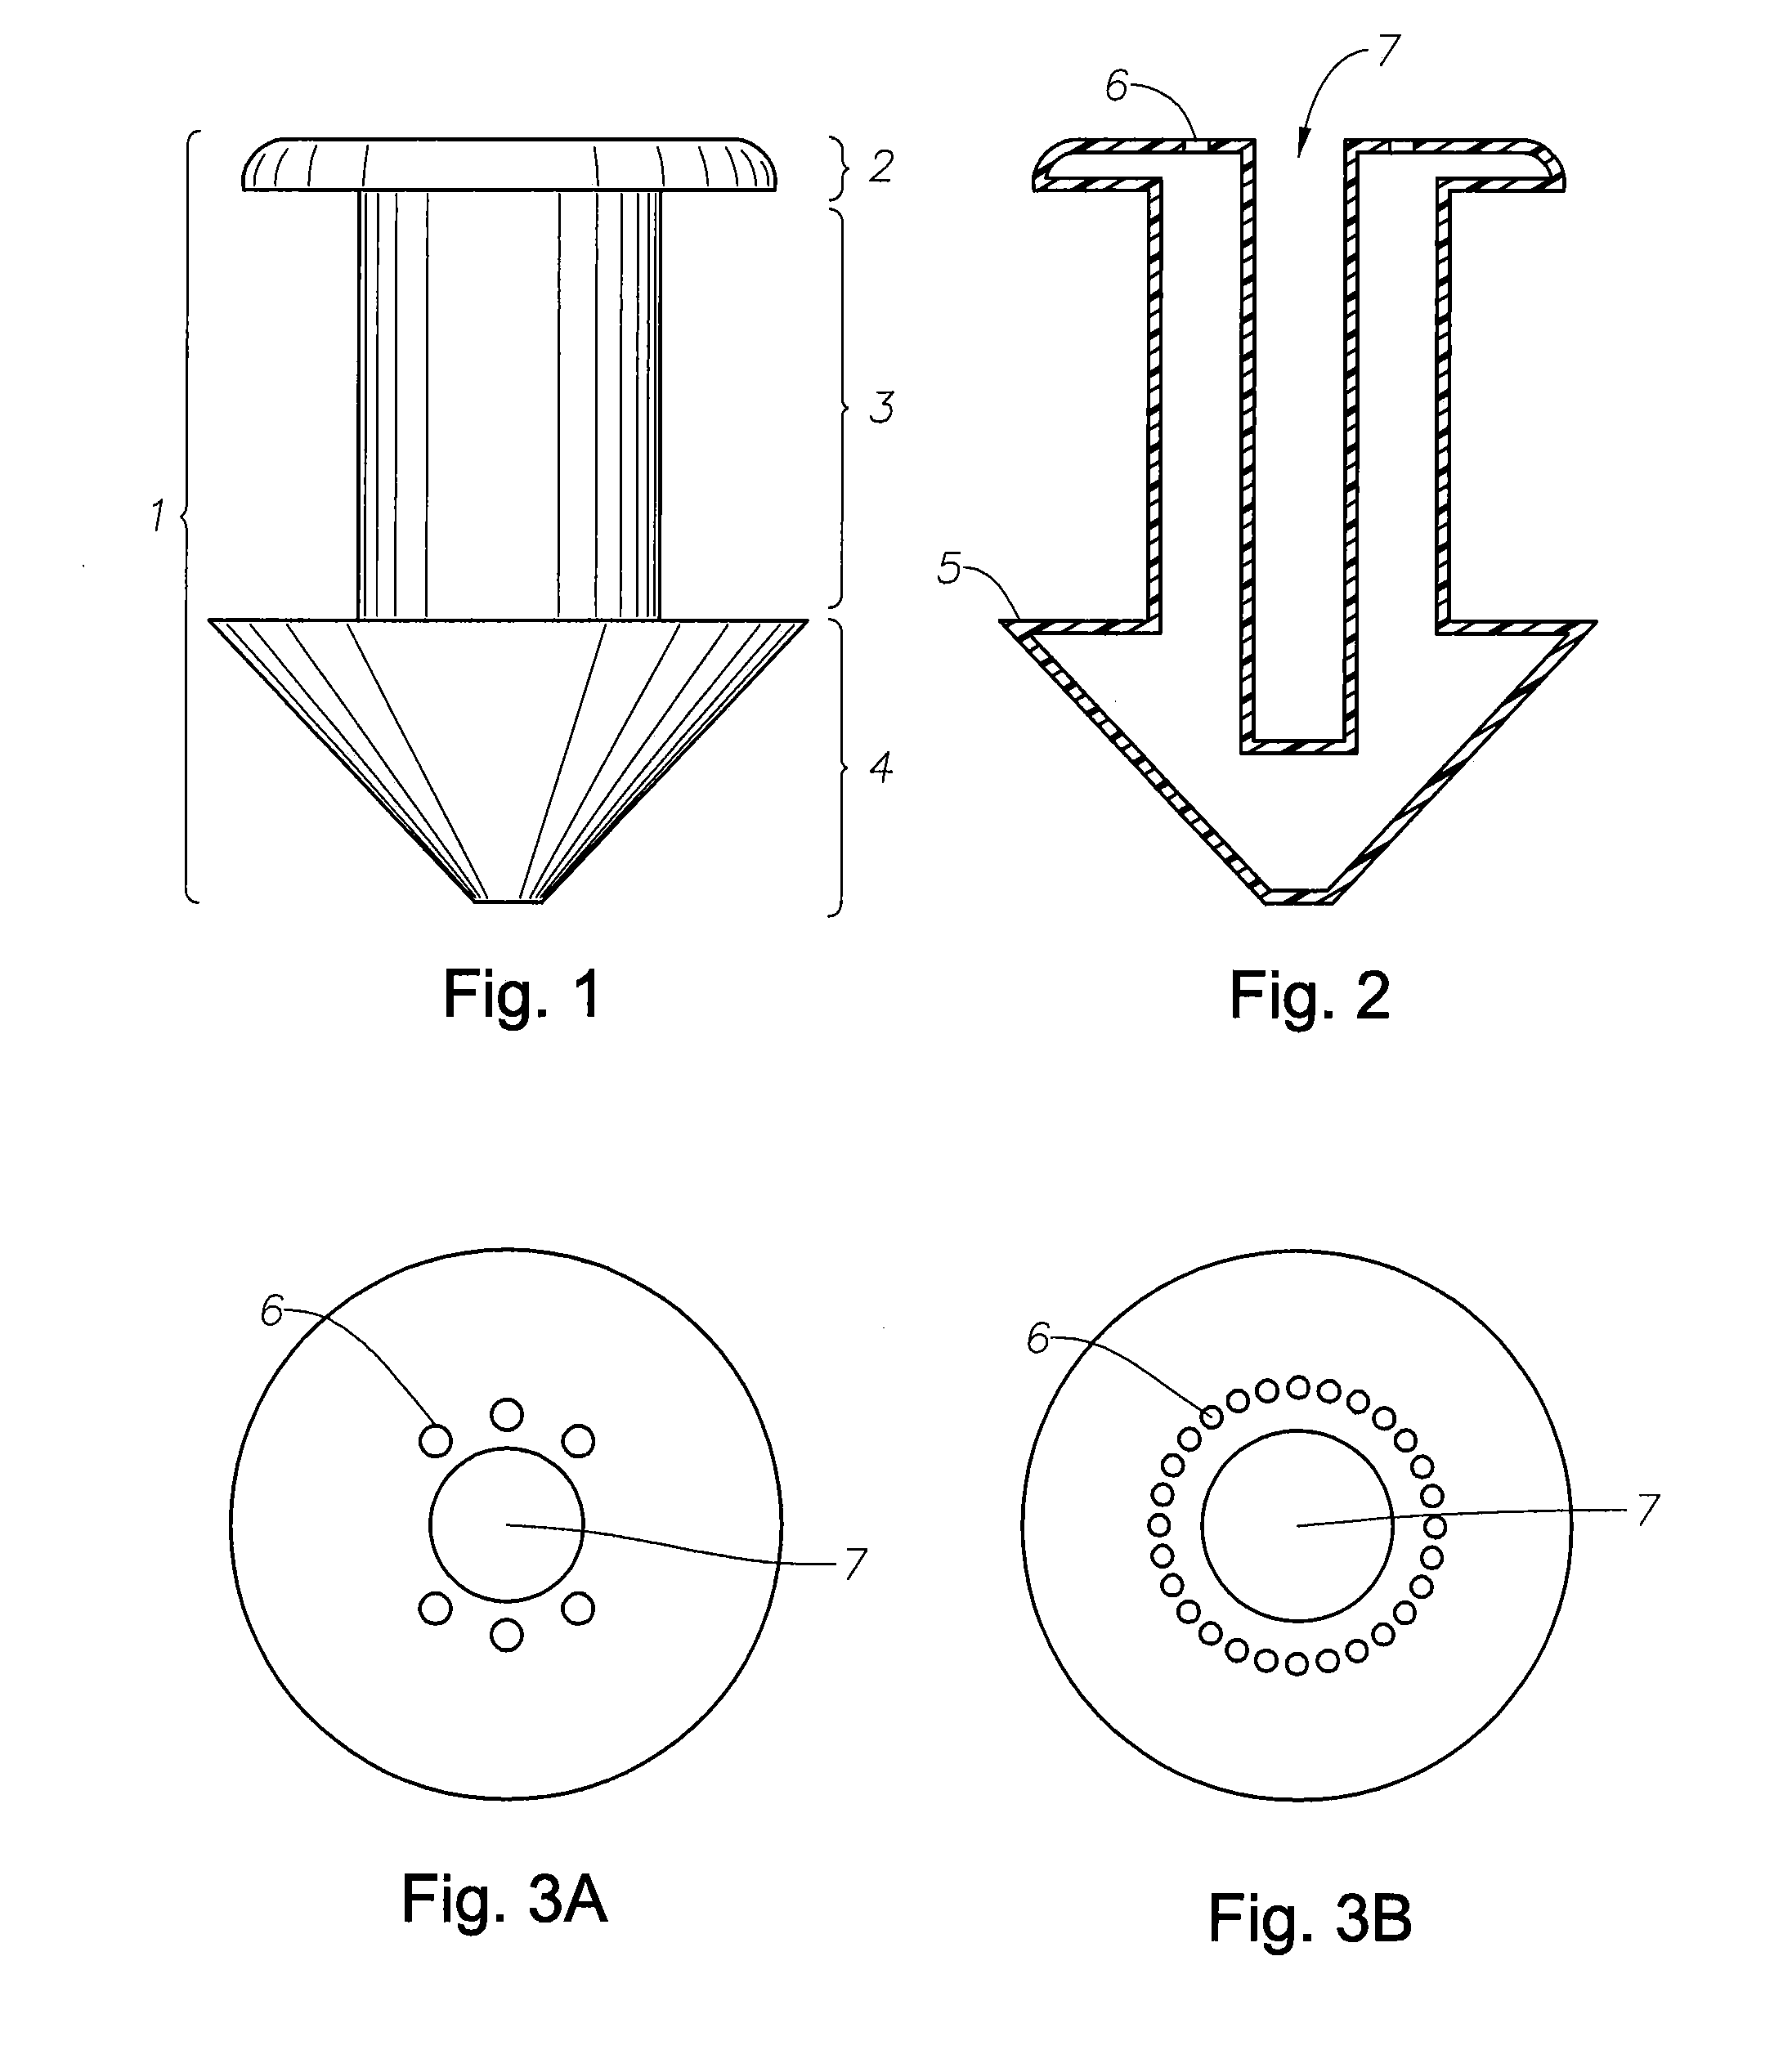 Punctal Plugs and Methods of Delivering Therapeutic Agents